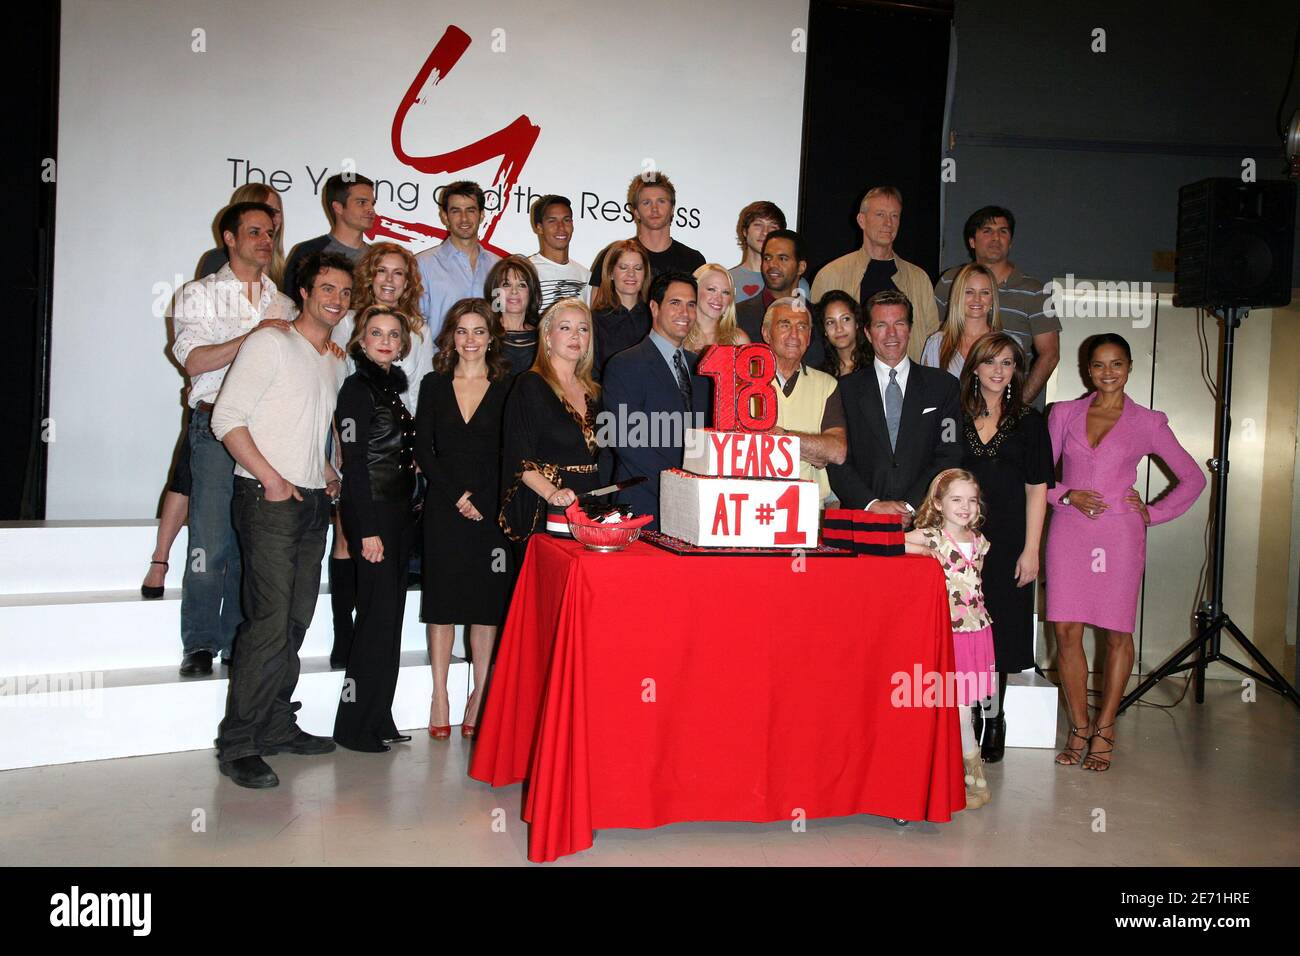 'All the cast of 'The young and the restless' celebrates 18 years on Number 1 on US TV on CBS ; Melody Thomas Scott, Lauralee Bell, Christian Leblanc, Tracey Bregman, Michelle Stafford, Kristoff St John, Ted Shackelford, Adrienne Frantz, Vincent Irizzari, Peter Bergman, Thad Luckinbill etc... In Los Angeles, CA, USA, on January 8, 2007. Photo by Denis Guignebourg/ABACAPRESS.COM' Stock Photo